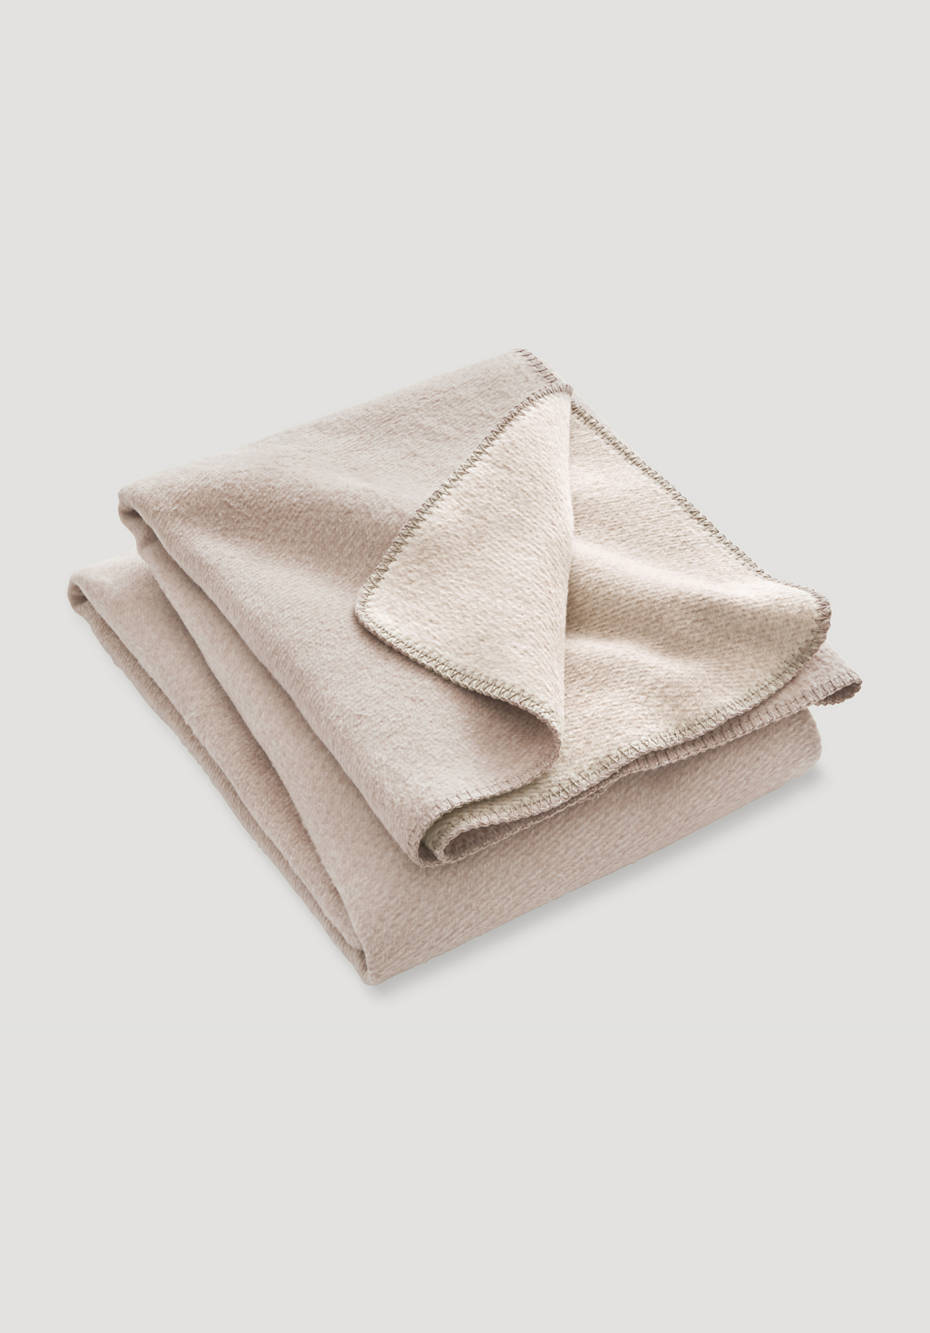 Malmö blanket made from pure organic cotton